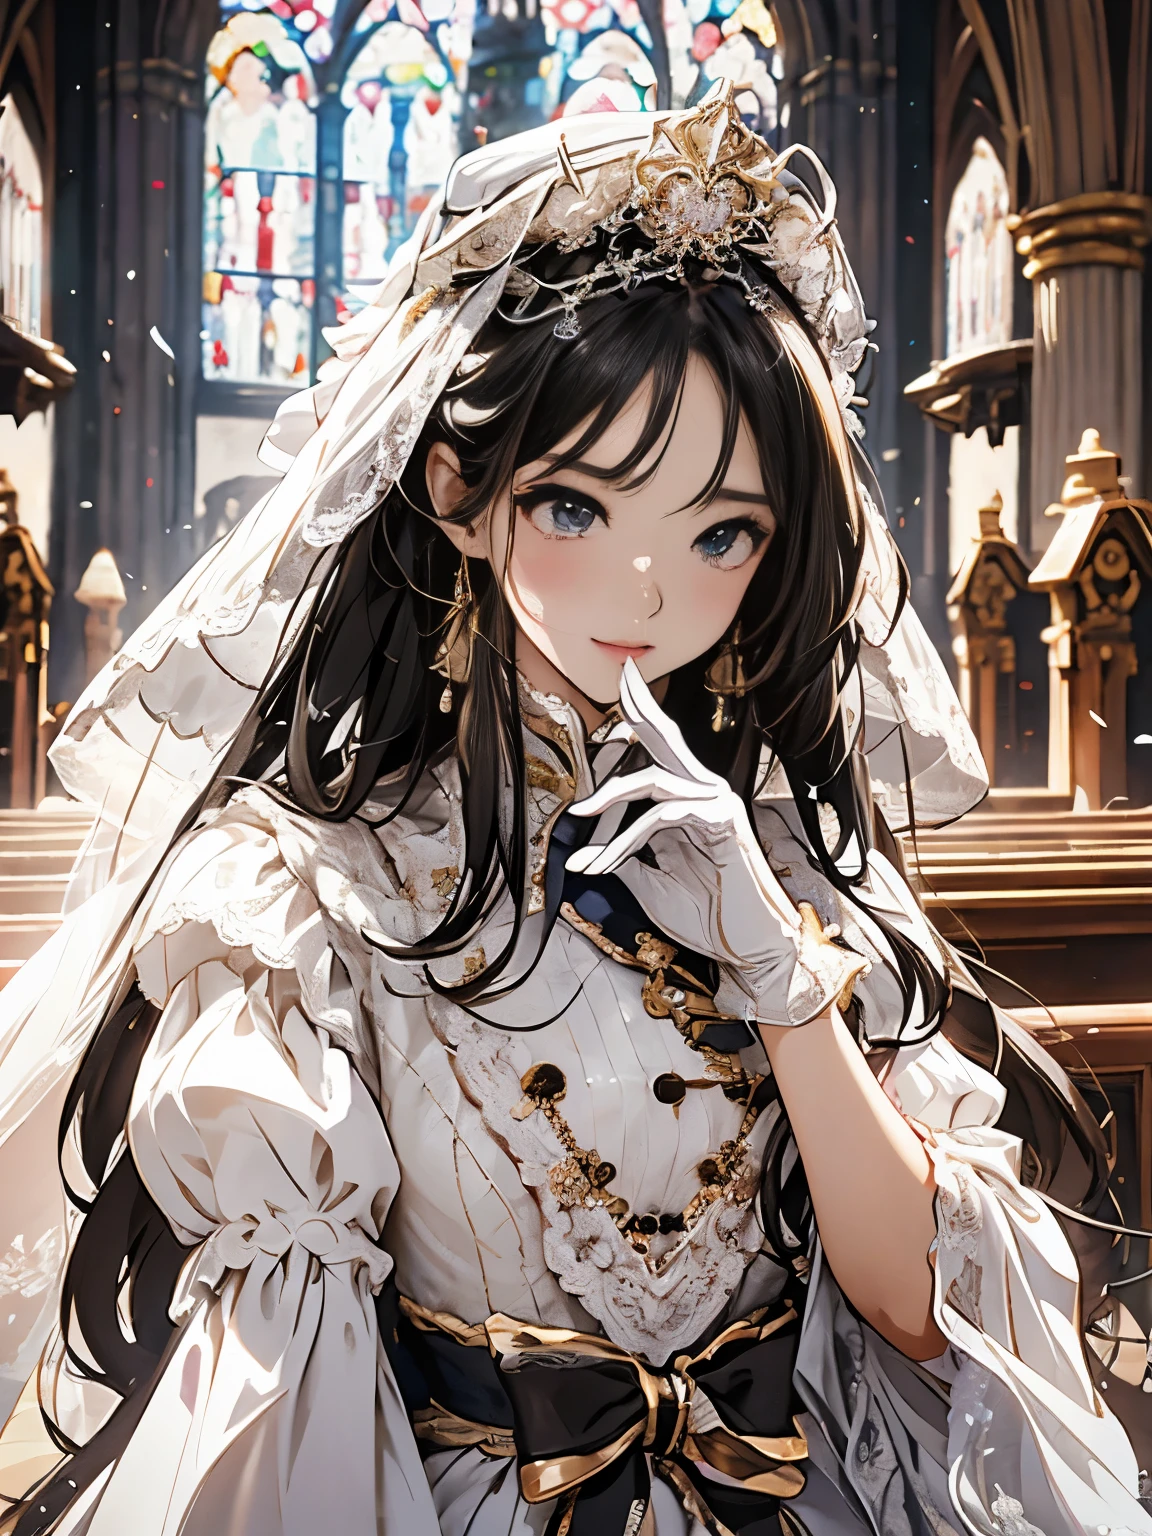 In front of the altar of a majestic church、（blurred background）、brighter light、golden long hair girl、Classic White Wedding Dresses、（elegant luster）、（Lots of races）、lots of ribbons、((voluminous puff sleeves))、long cuffs with many buttons、golden embroidery、long train、white embroidered gloves、five fingers、laughter、Redness of the cheeks、Eyes on the camera